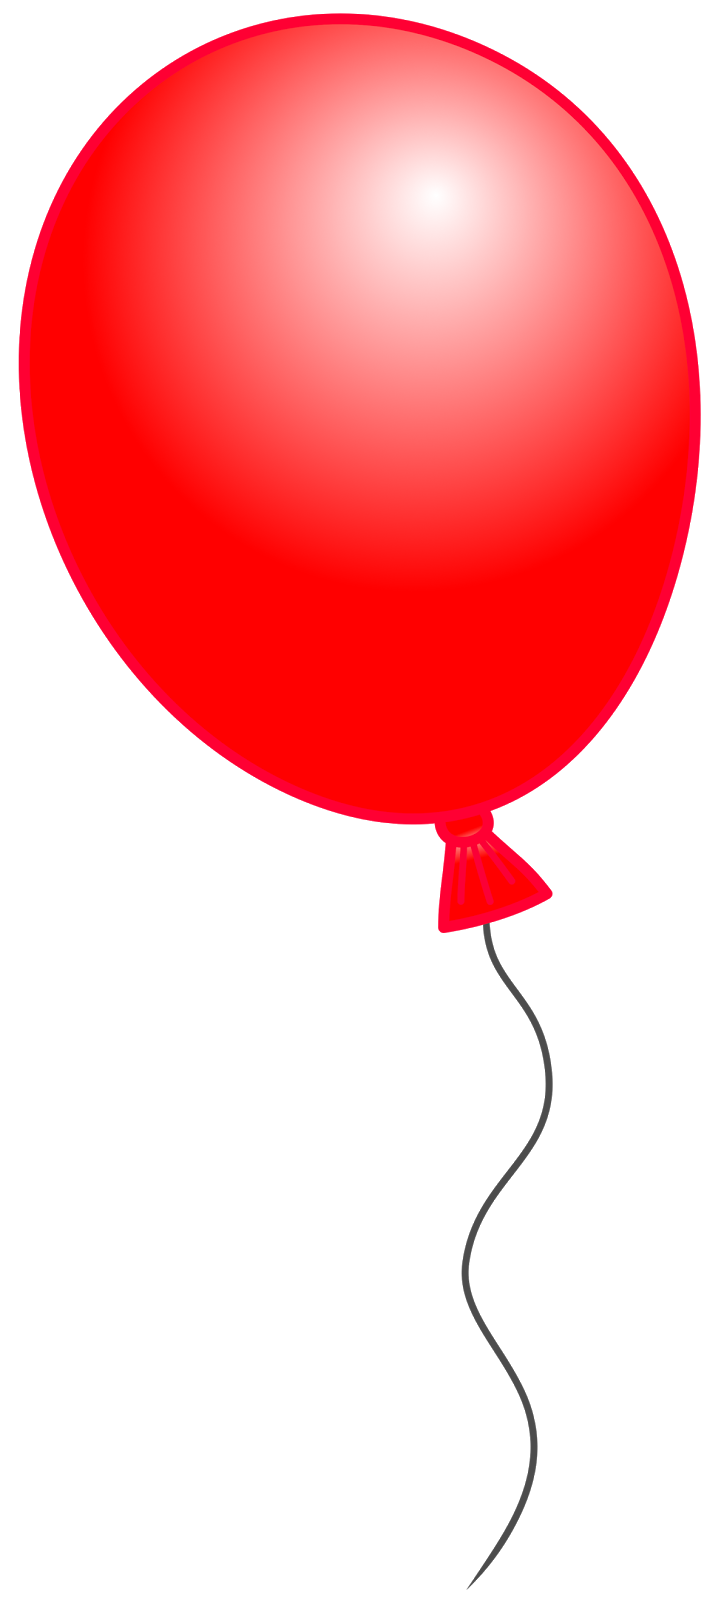 You Can Use Each Balloon On I - Baloon Clipart